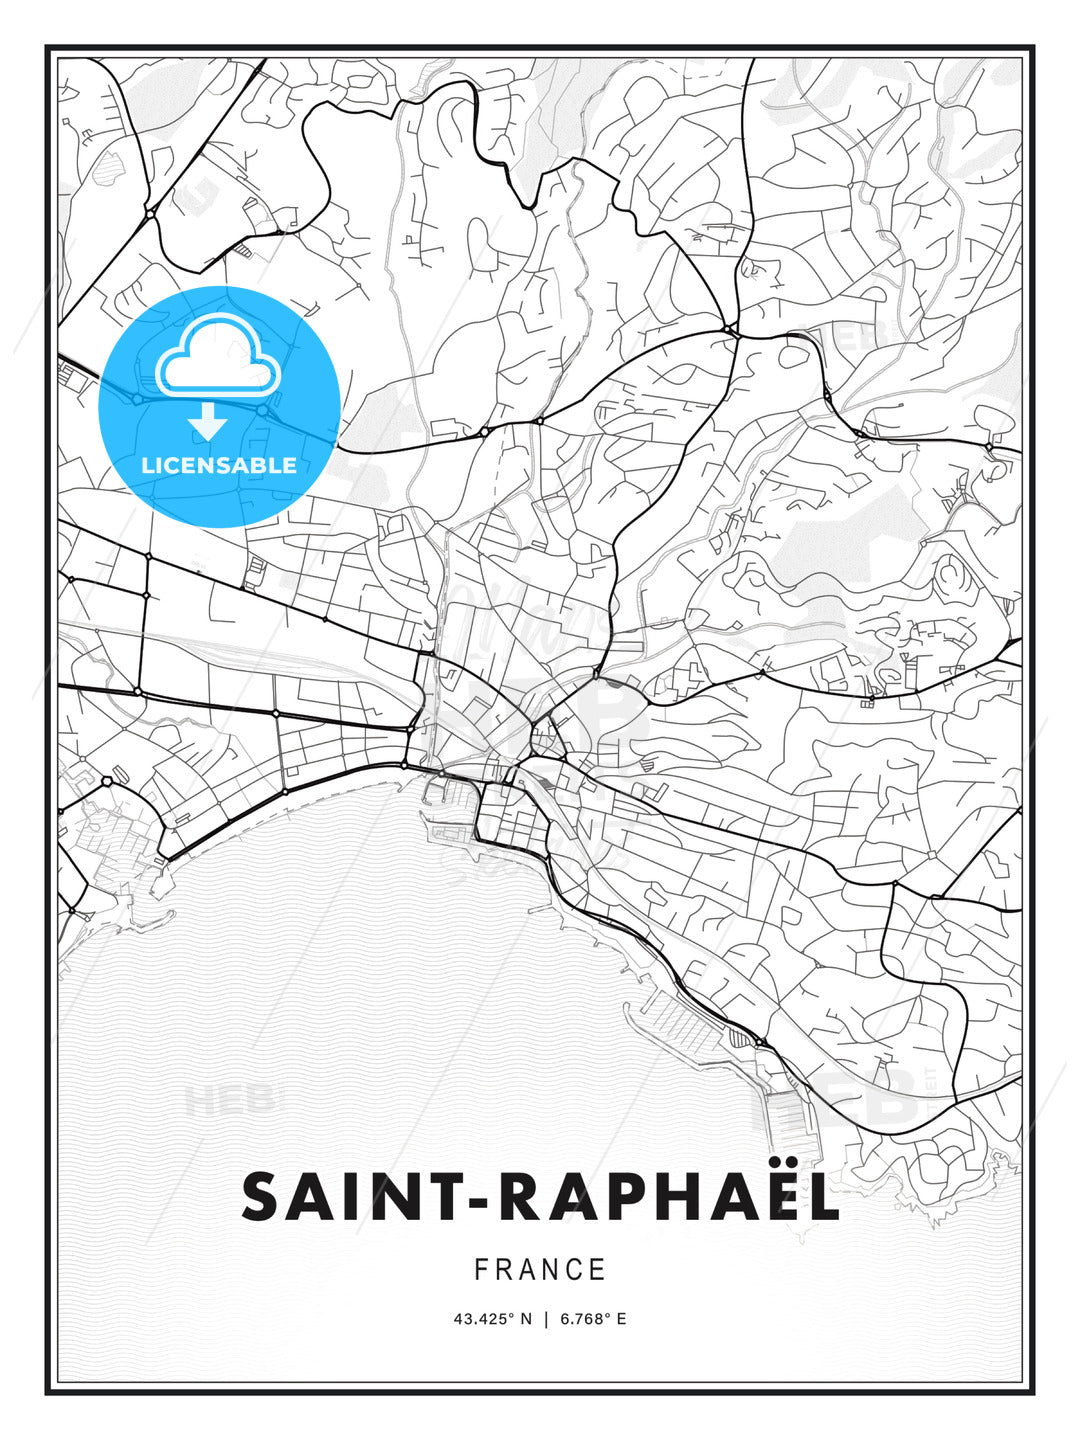 Saint-Raphaël, France, Modern Print Template in Various Formats - HEBSTREITS Sketches